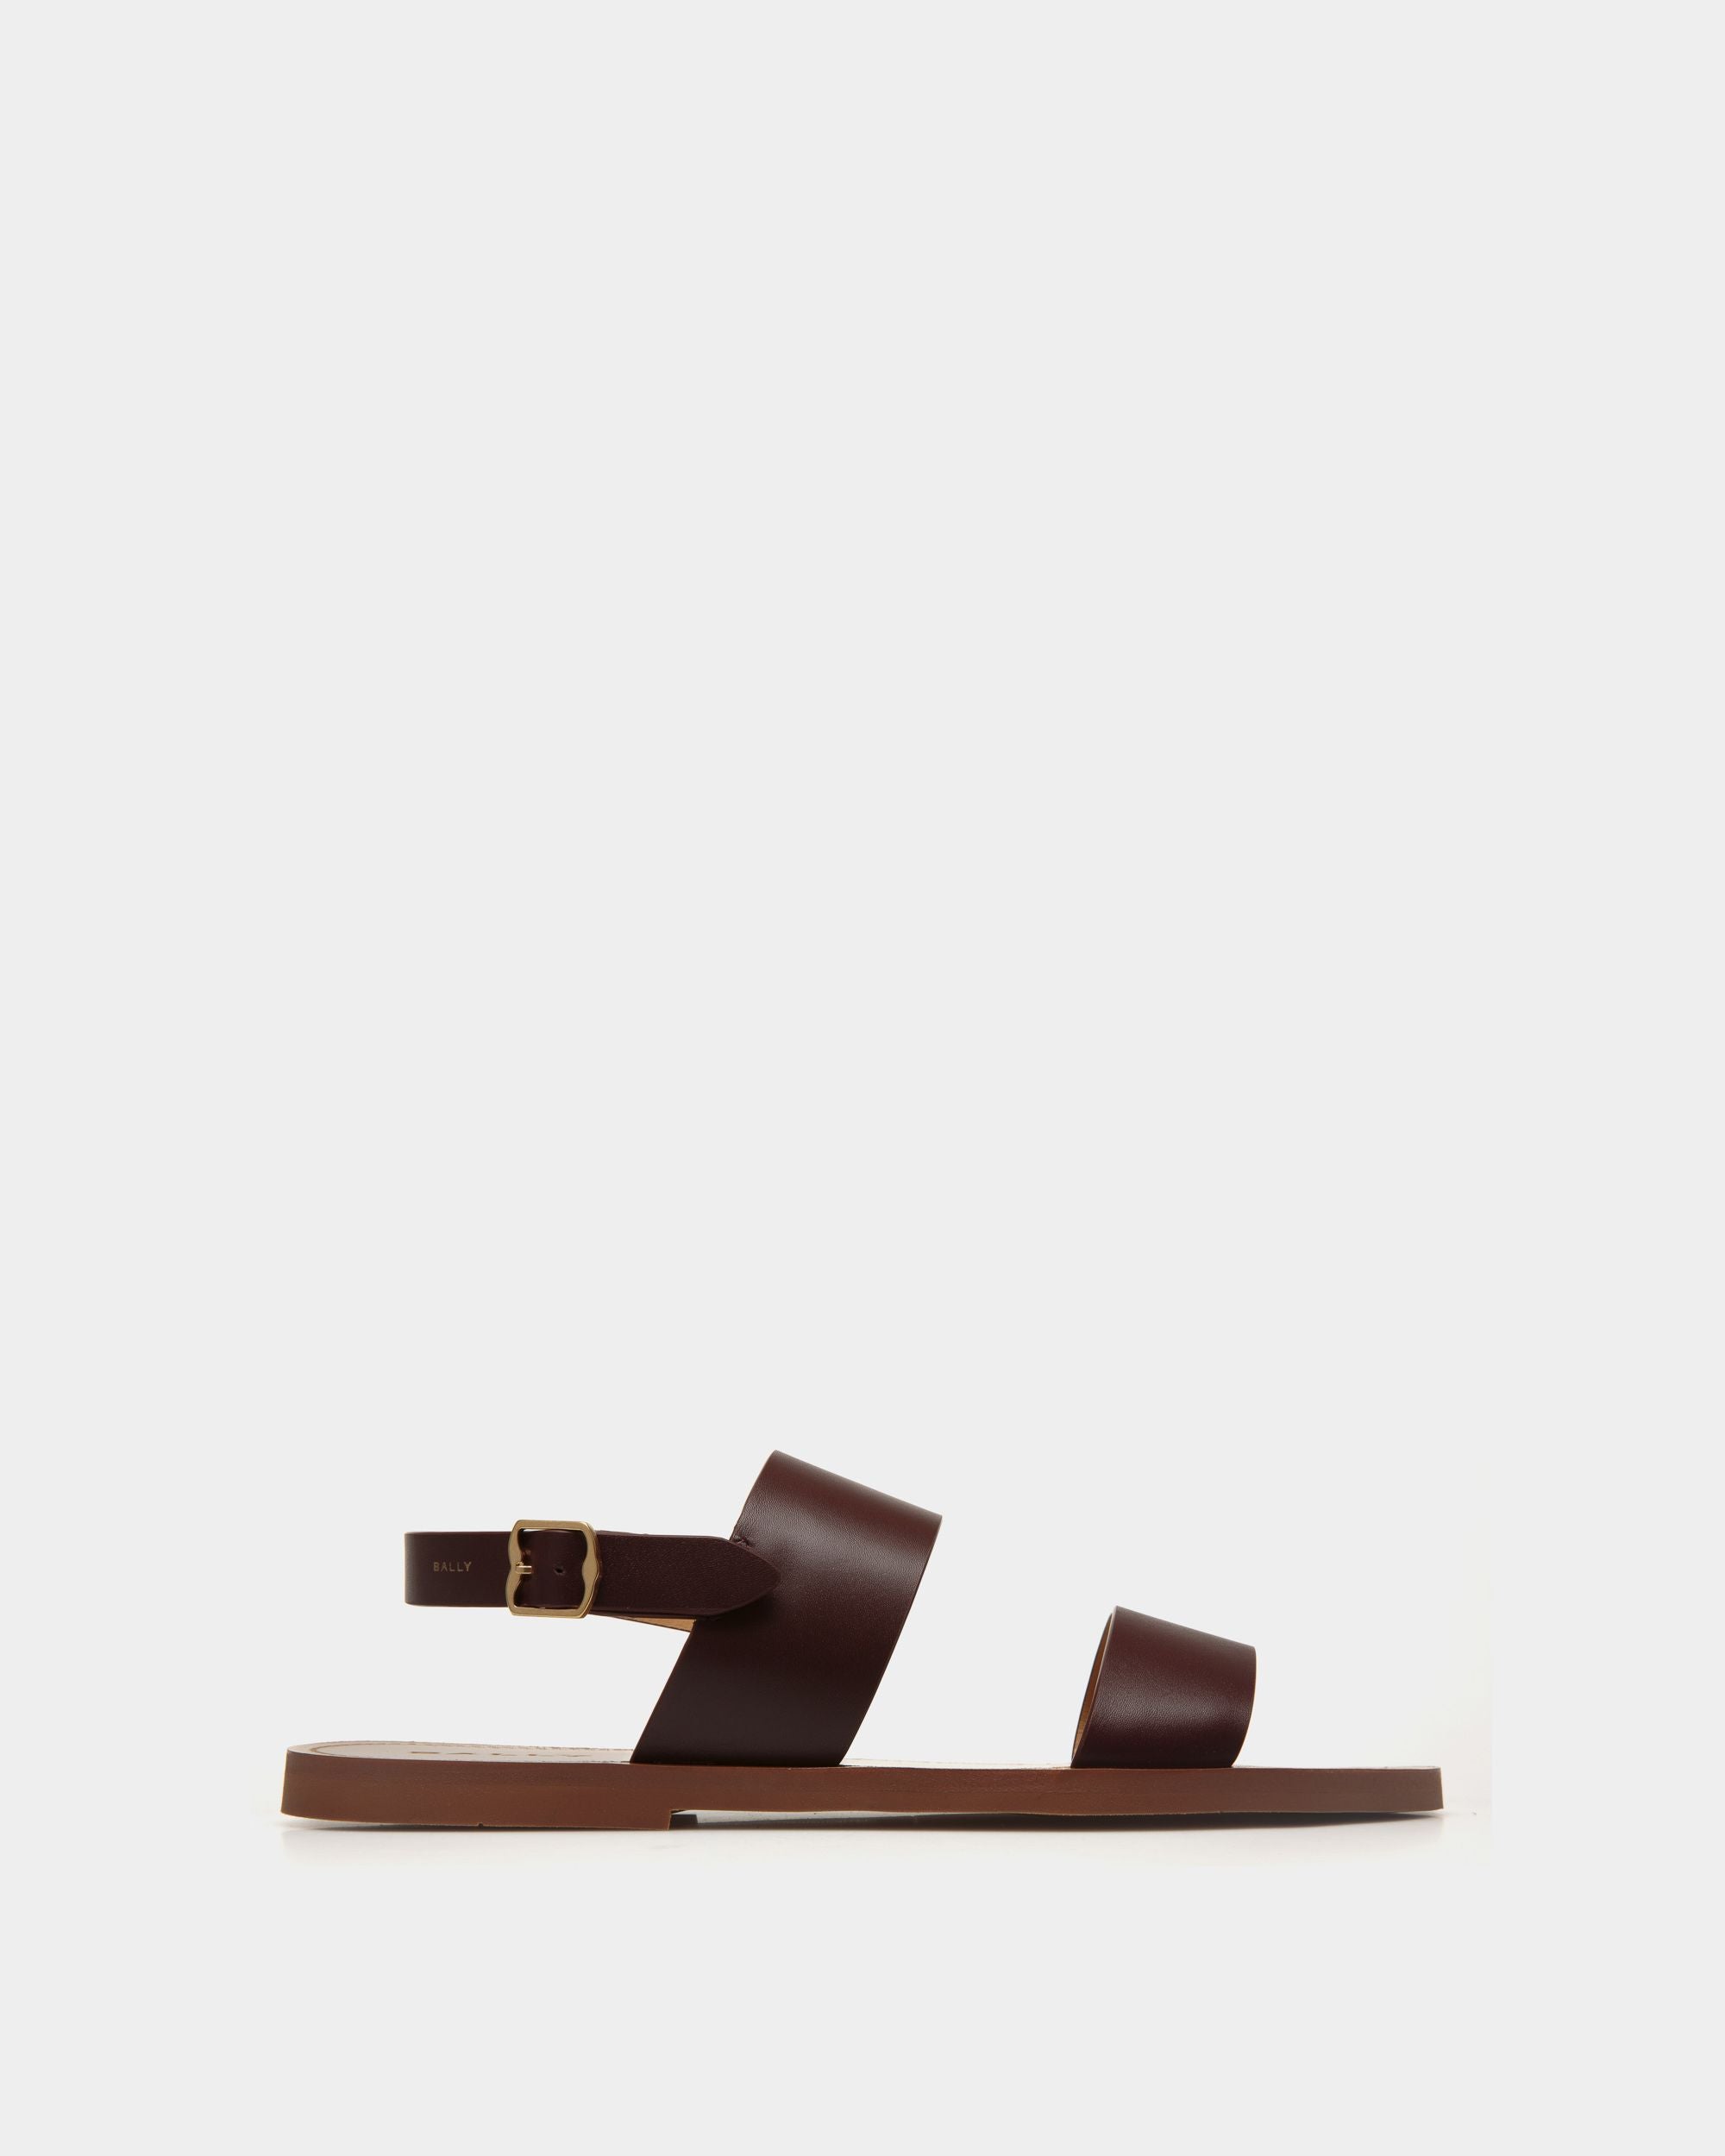 Chateau | Men's Sandal in Chestnut Brown Leather | Bally | Still Life Side